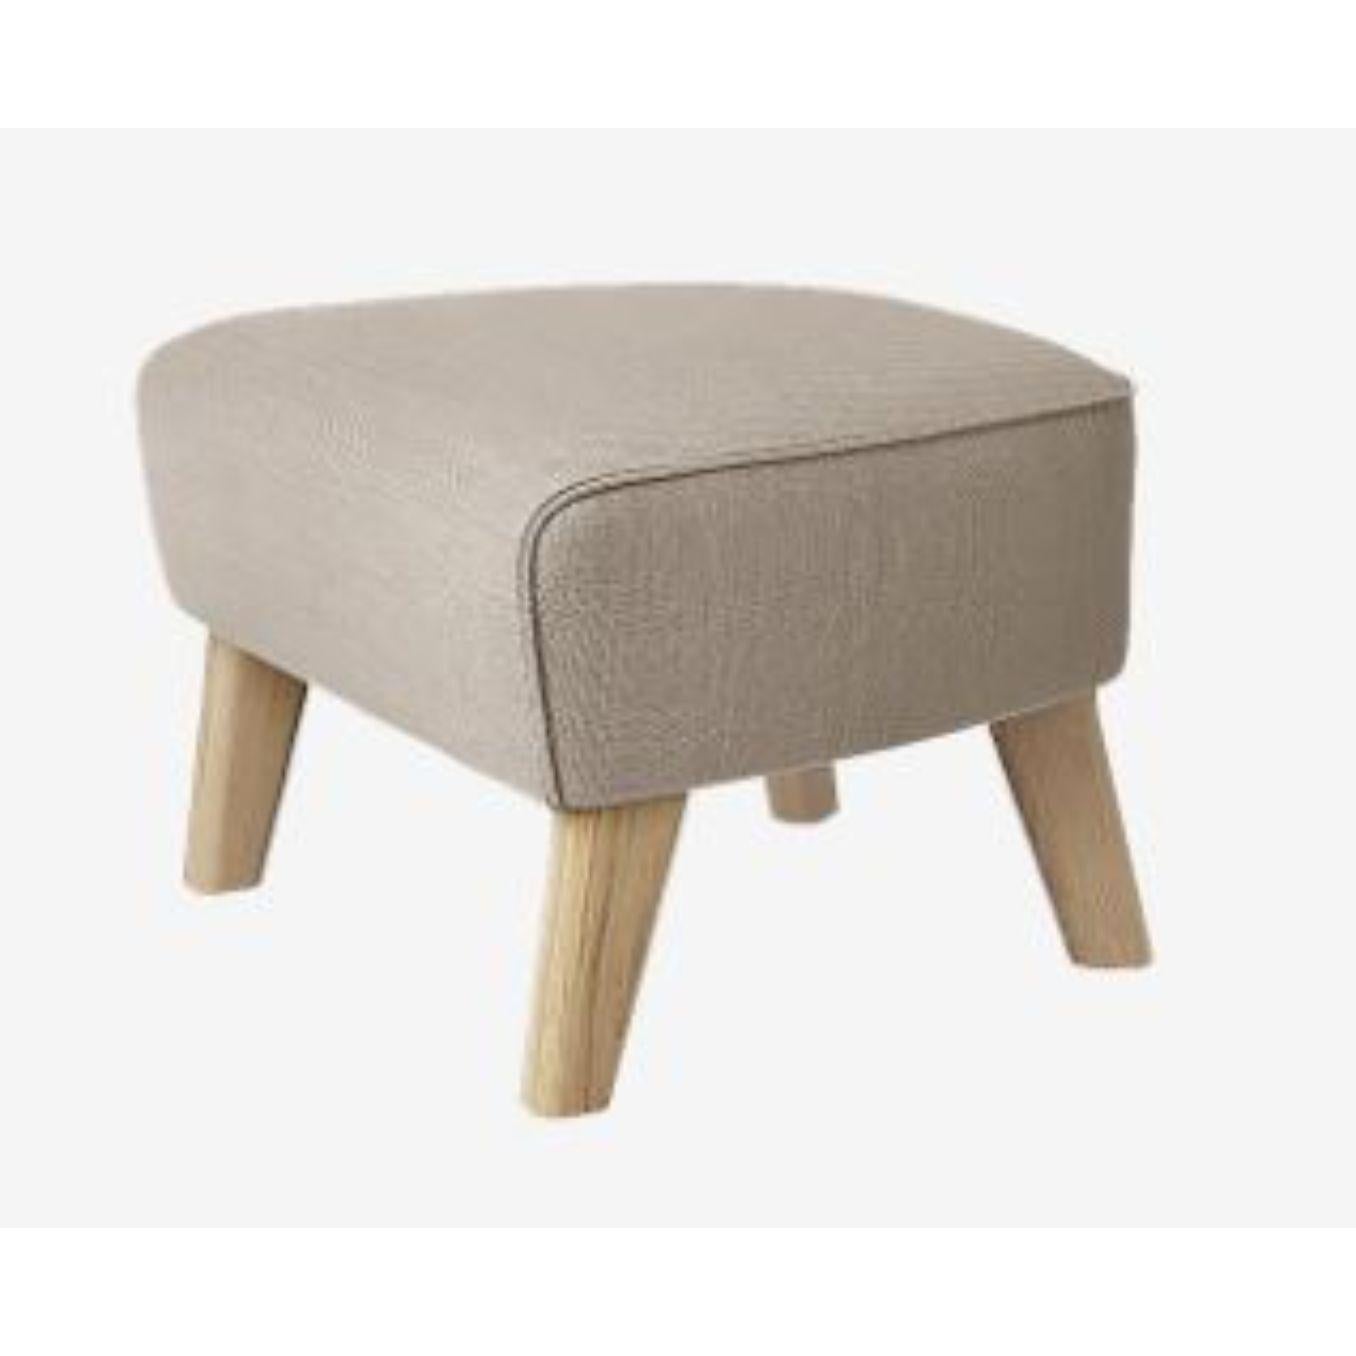 Sahco Zero 12 my own chair footsool by Lassen
Dimensions: D 58 x W 56 x H 40 cm 
Materials: textile, natural oak, 
Also available in different colours and materials.
Weight: 18 Kg

The My Own Chair Footstool has been designed in the same